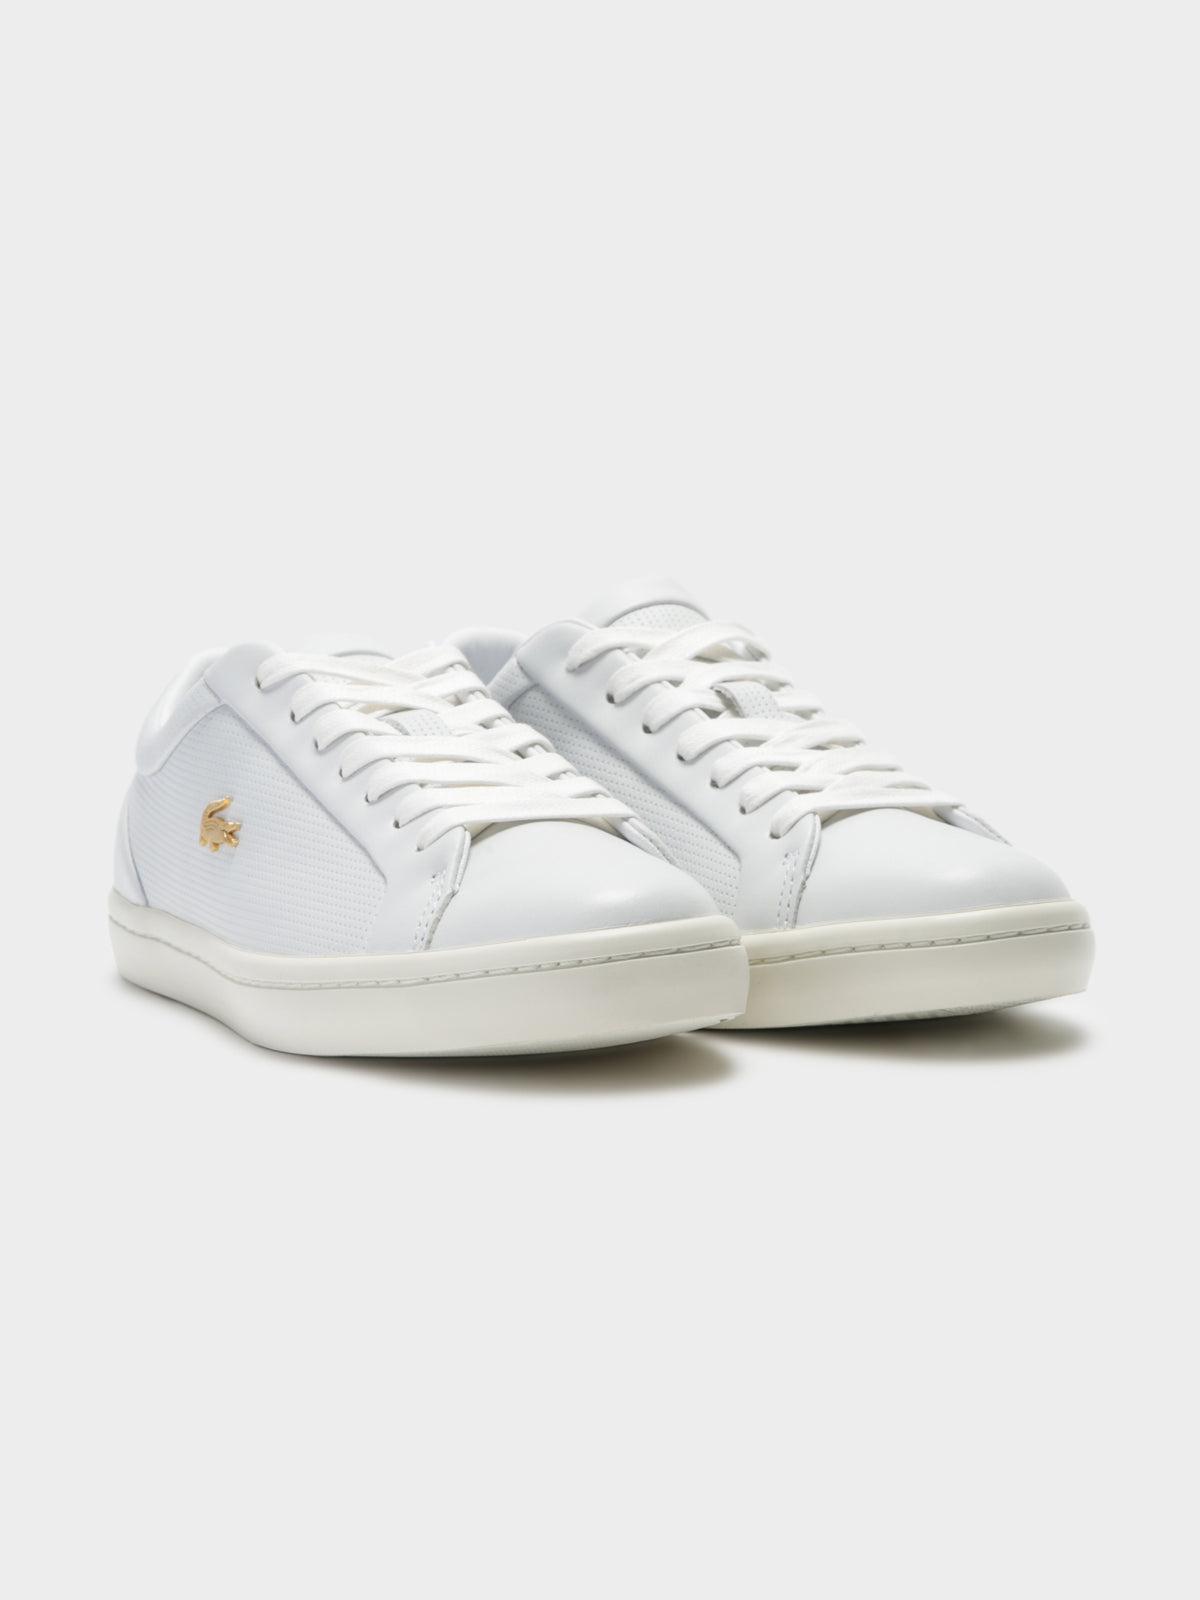 Womens Straighset 119 Sneakers in White